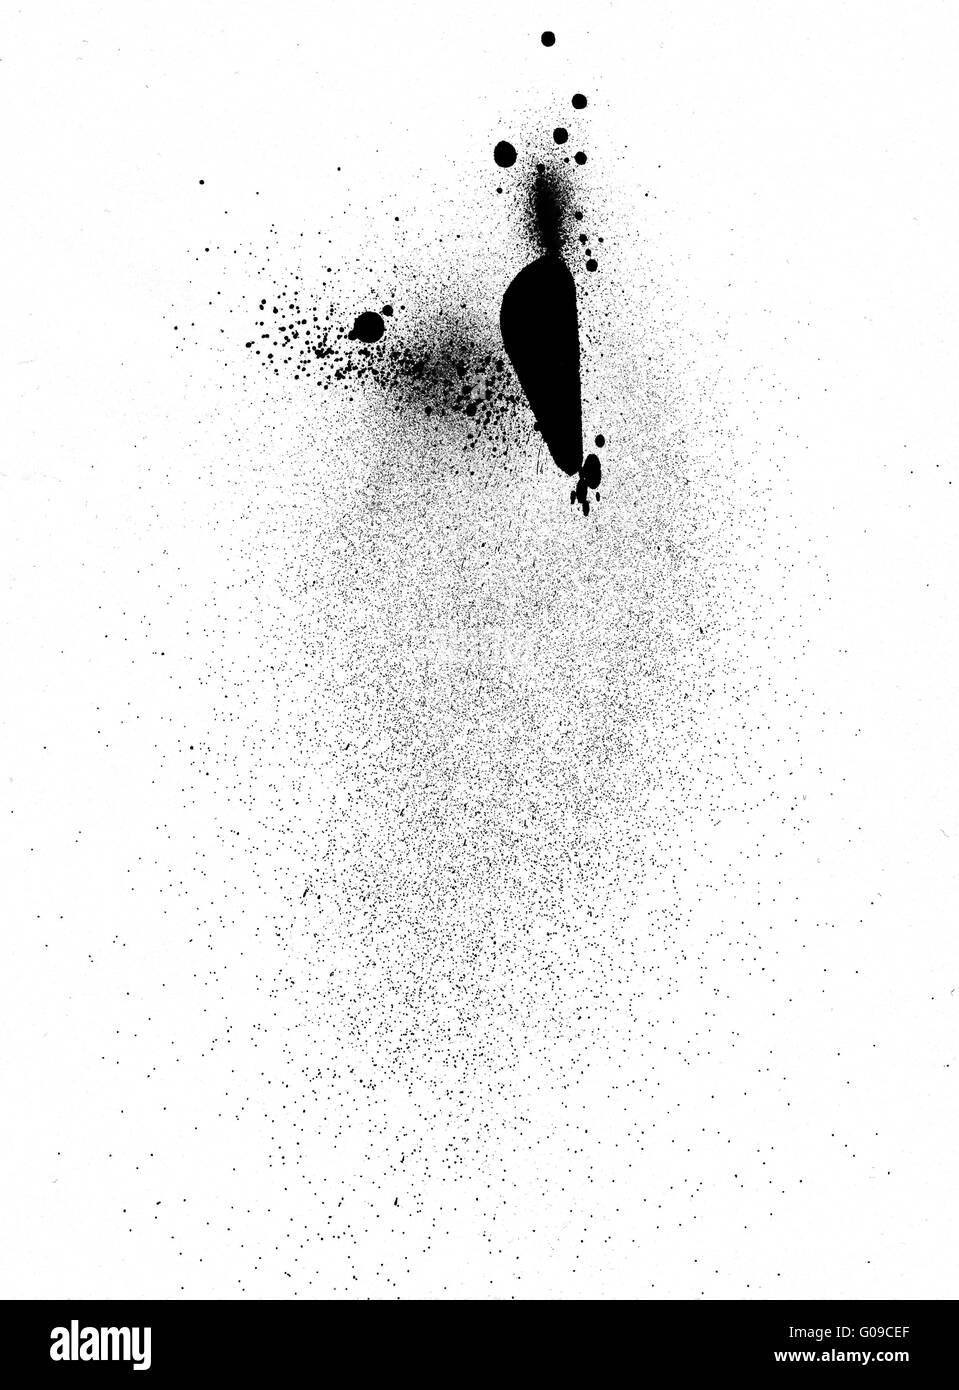 An abstract paint splatter frame in black and white Stock Photo